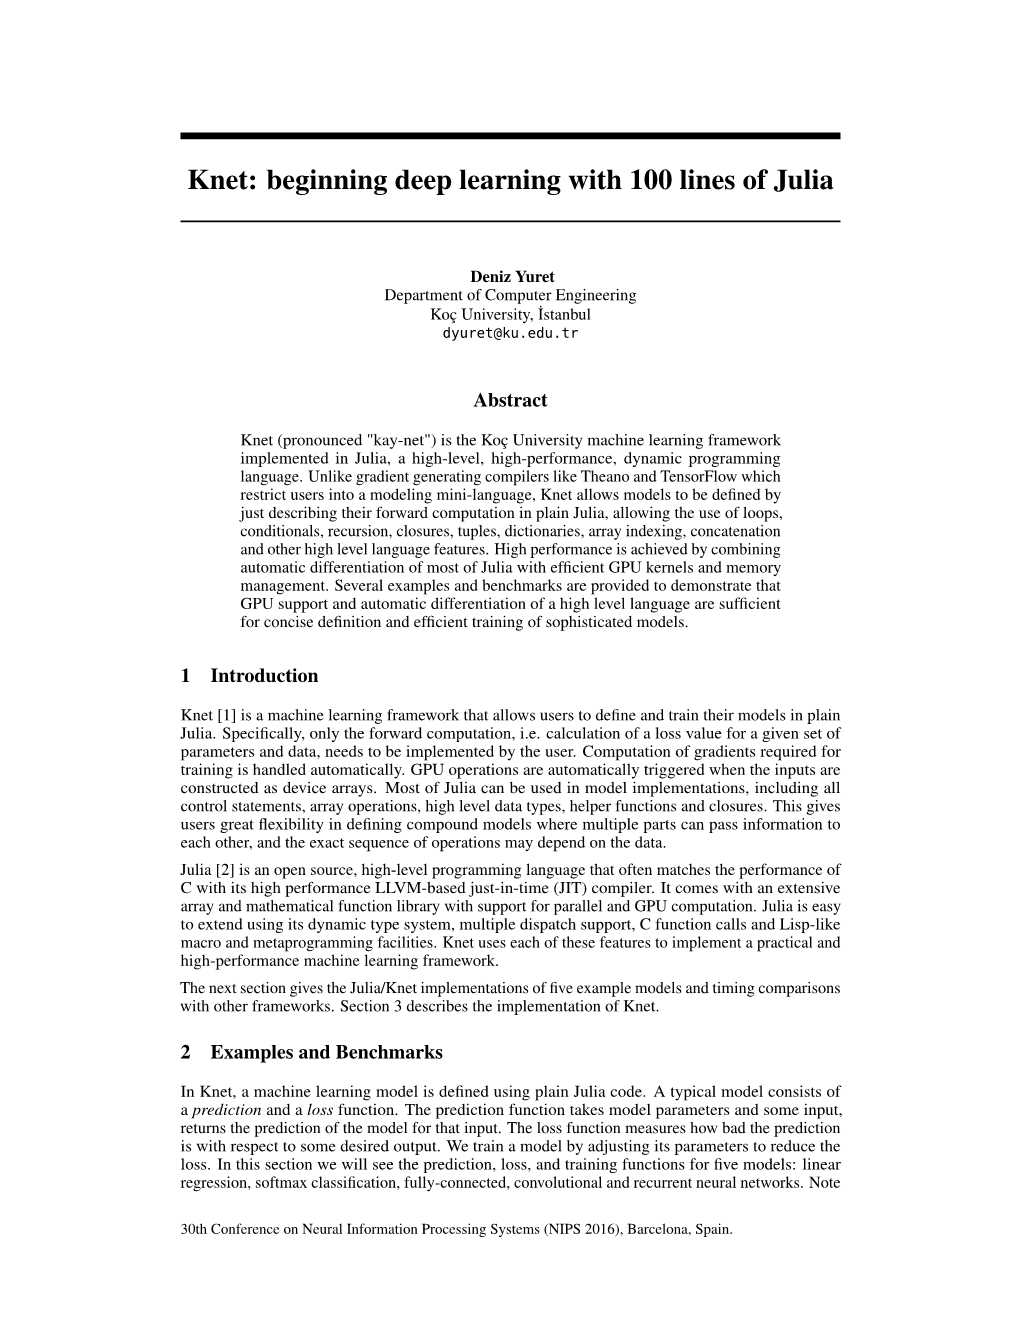 Knet: Beginning Deep Learning with 100 Lines of Julia